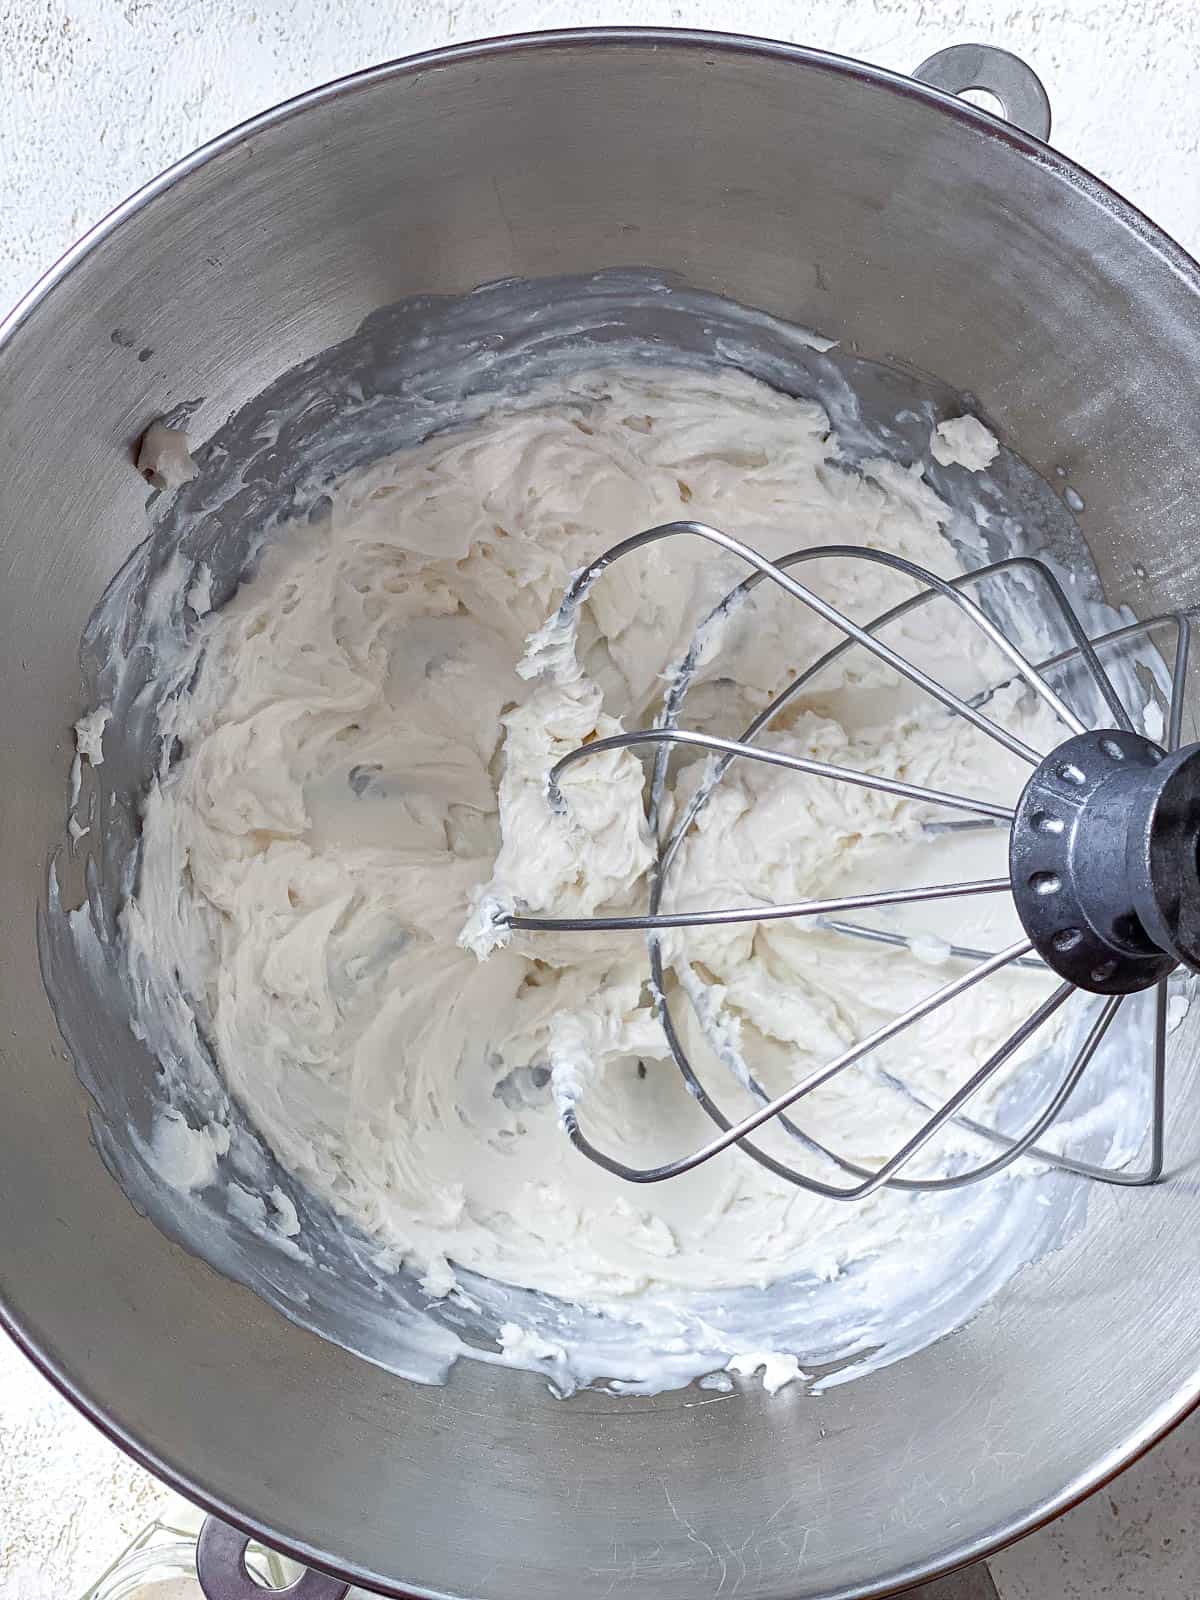 process s،t of whisking ingredients in bowl